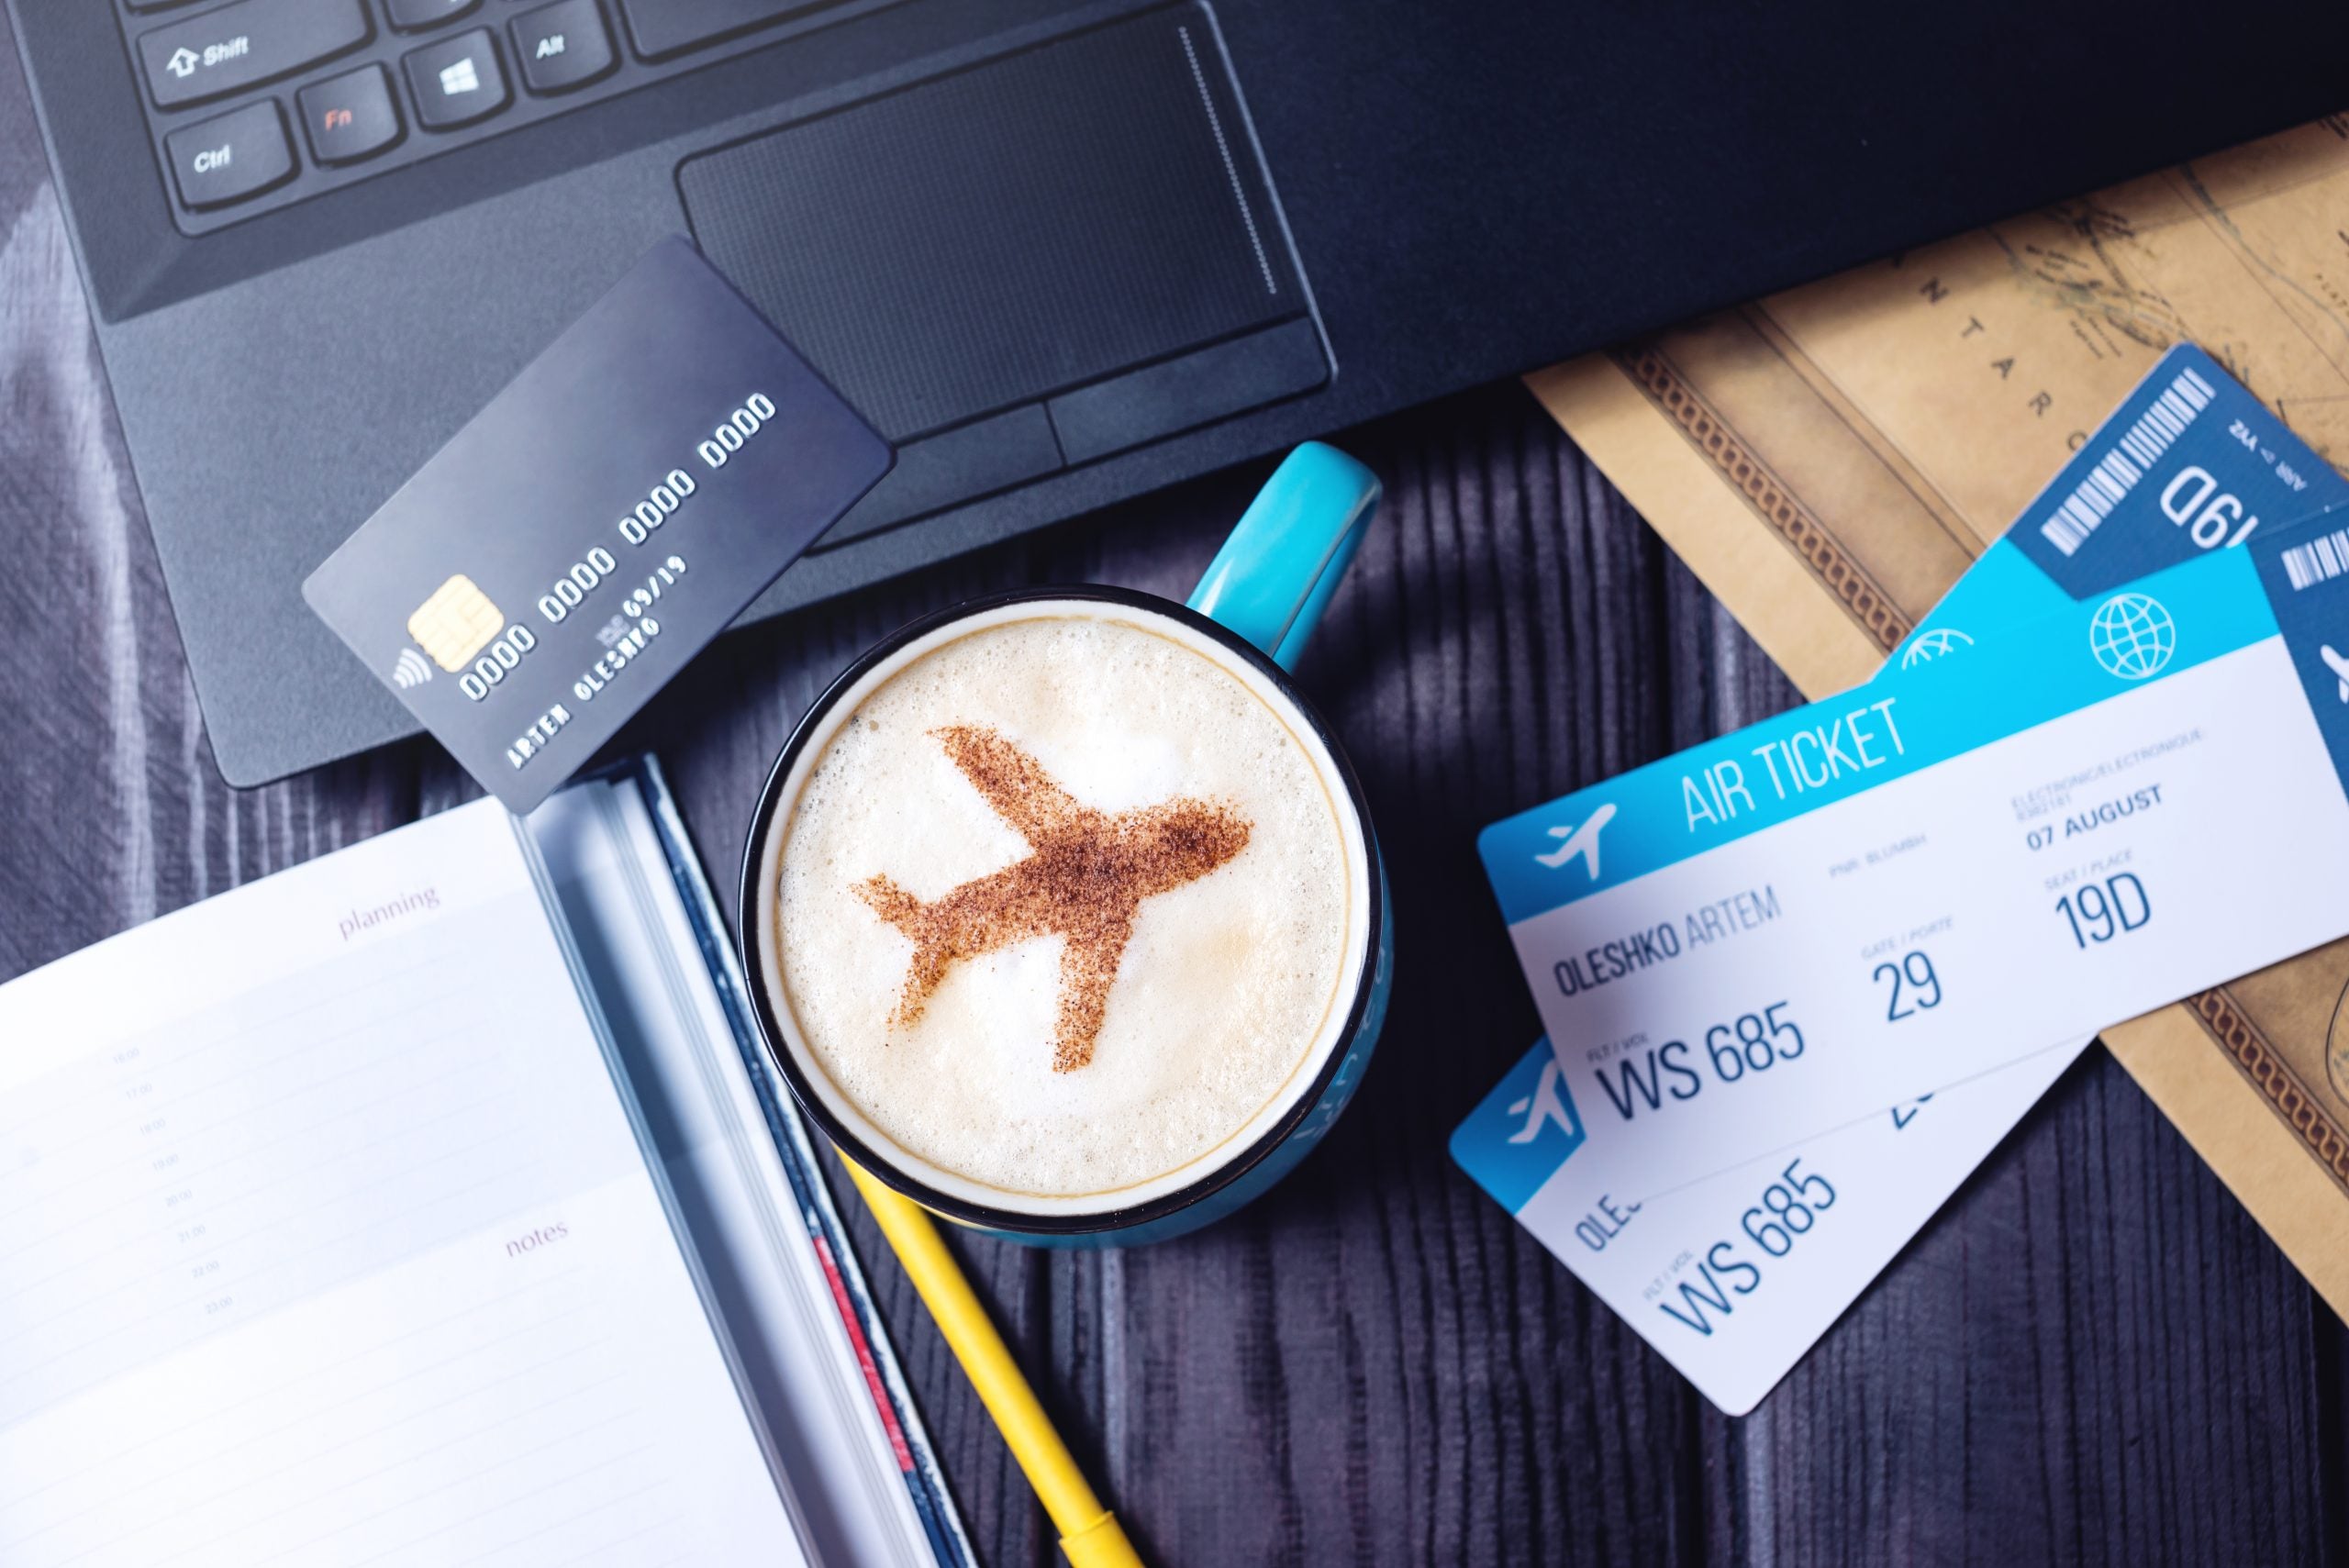 Why you should carry a backup credit card while traveling